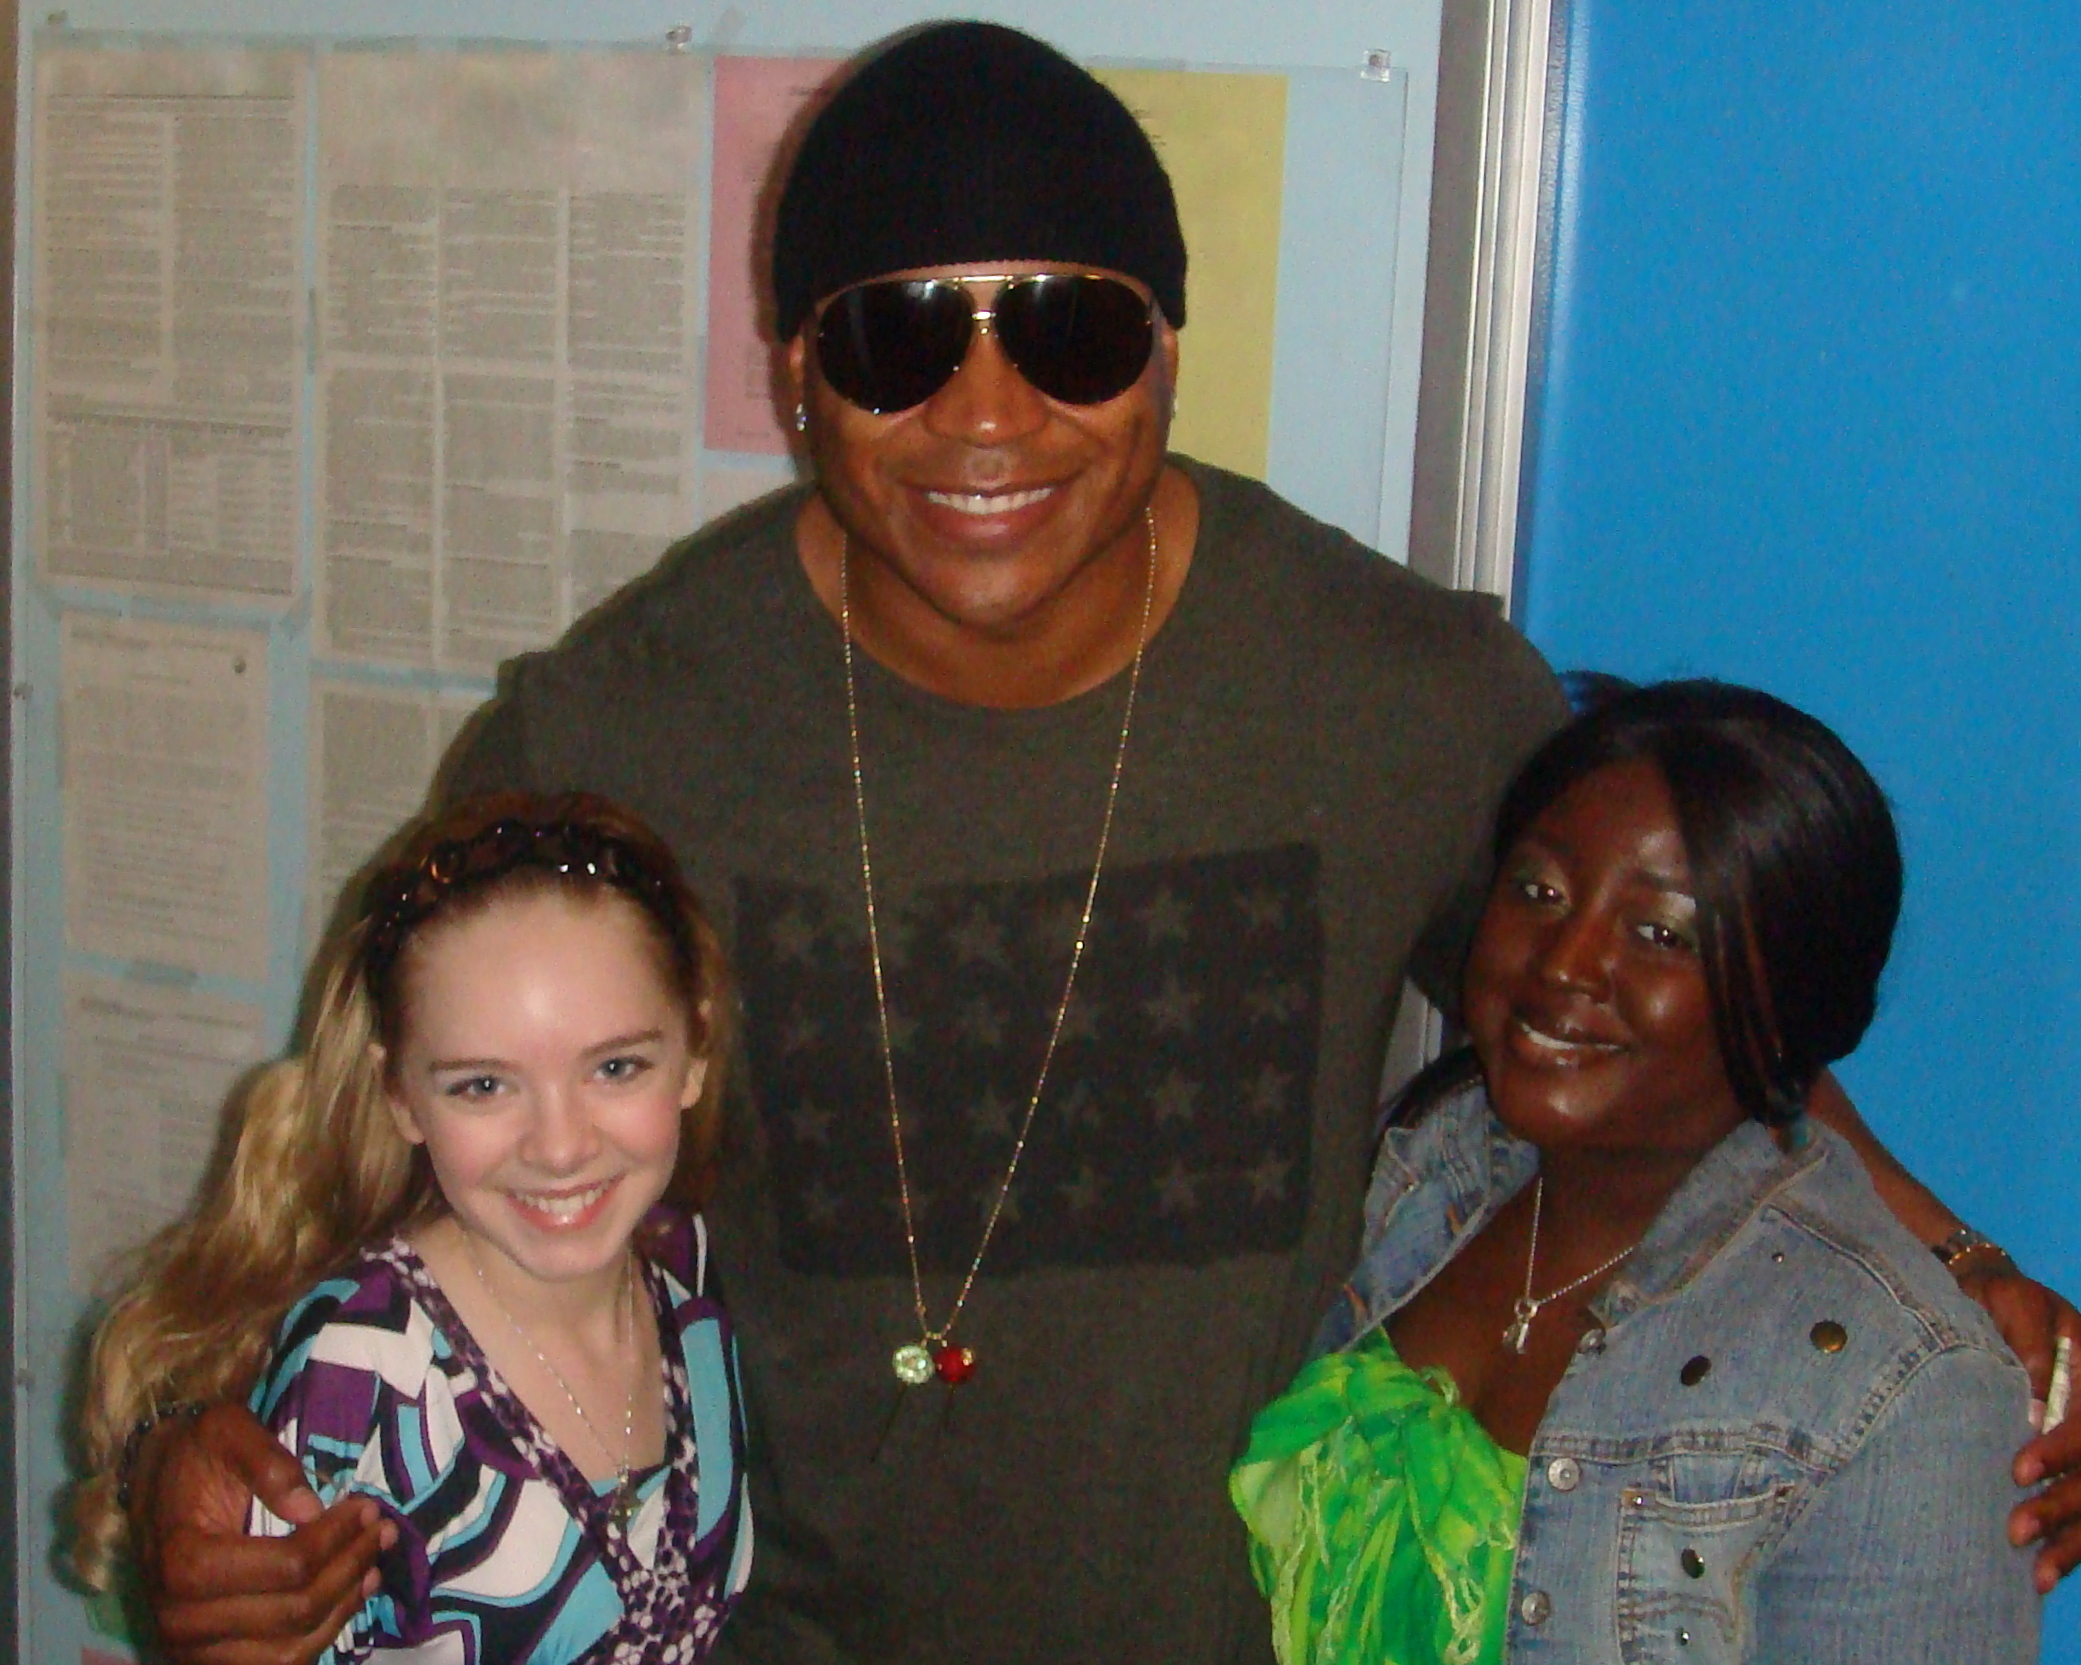 Darcy Rose Byrnes, LL Cool J and Ambrit Millhouse